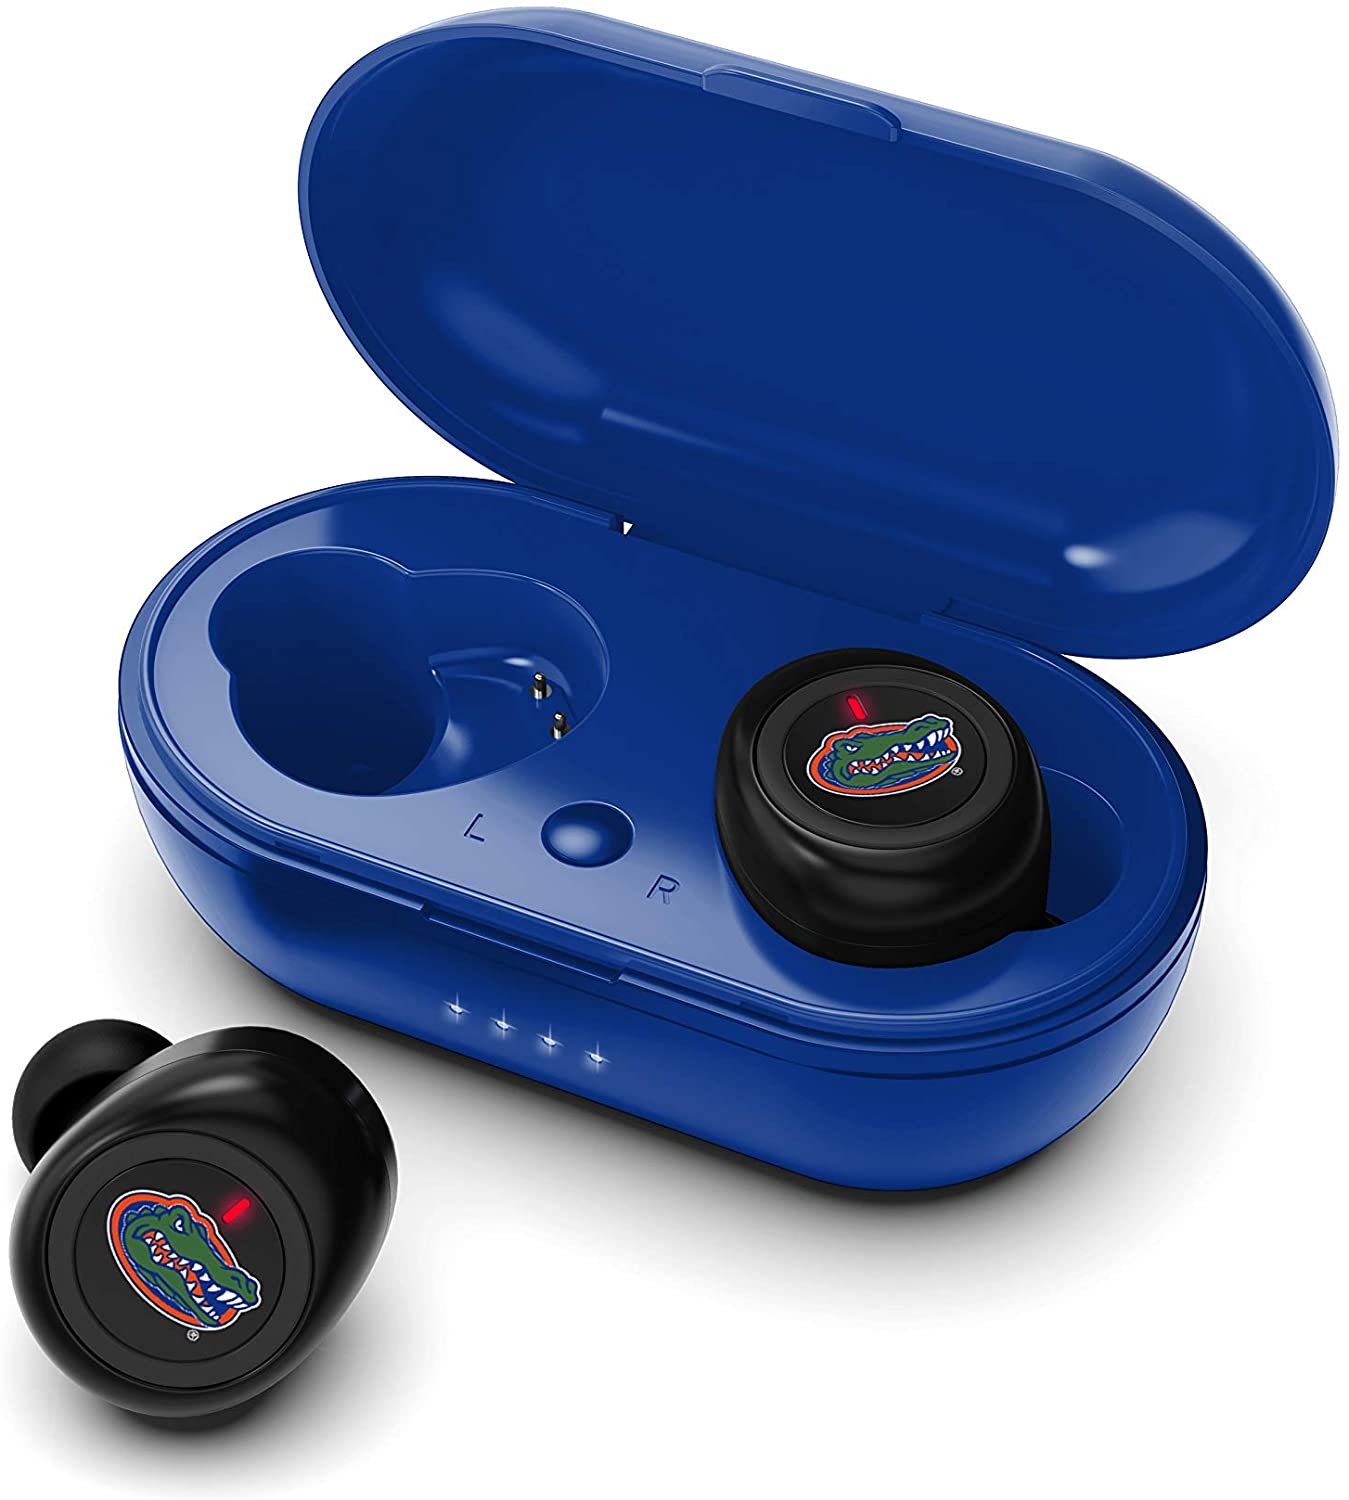 Florida Gators True Wireless Bluetooth Earbuds w/Charging Case by Prime Brands